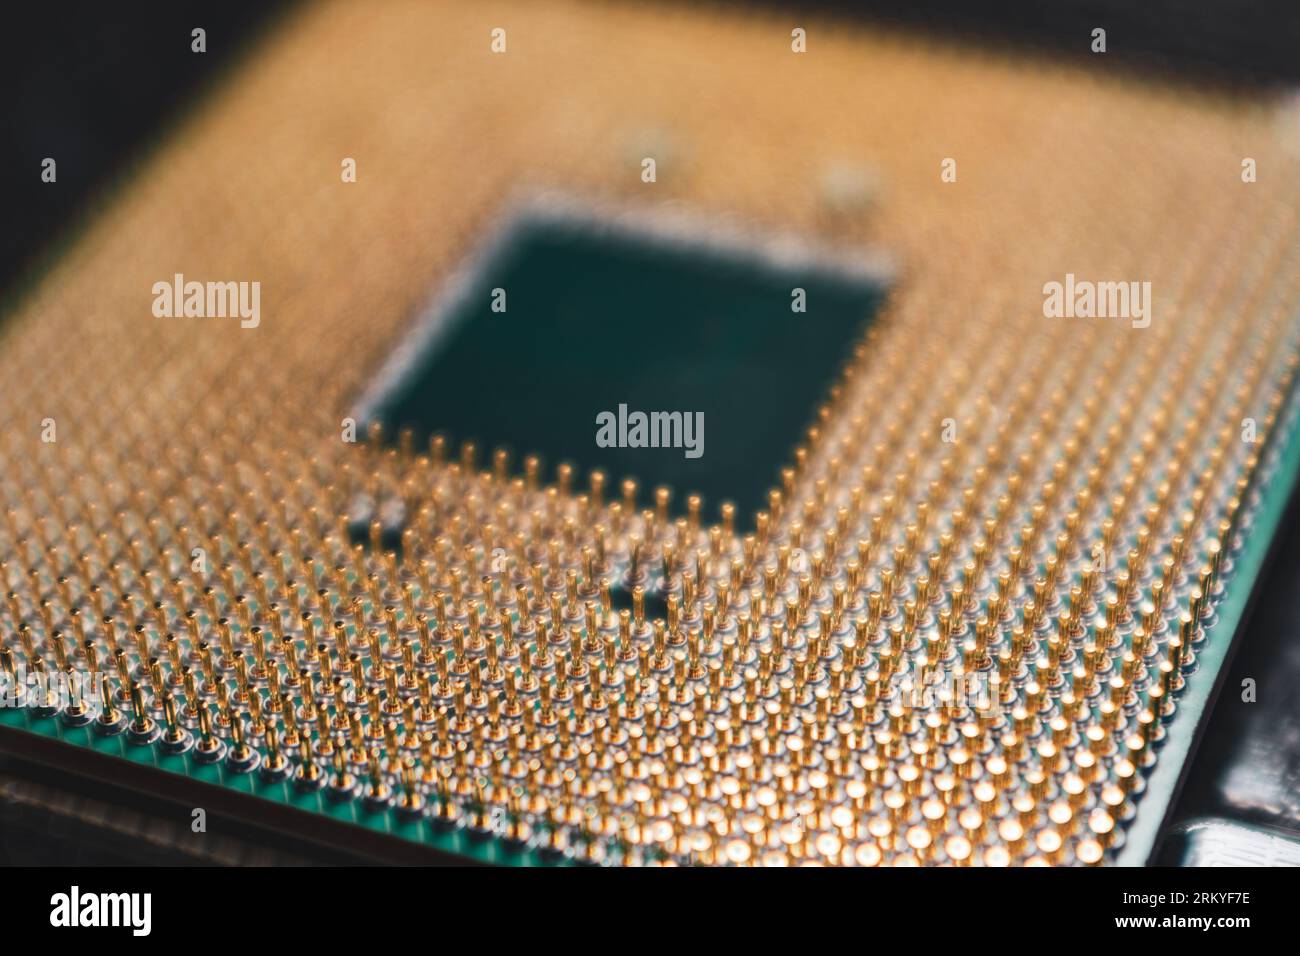 CPU microchip golden pins contacts close-up. Desktop PC computing processor unit with selective focus view Stock Photo